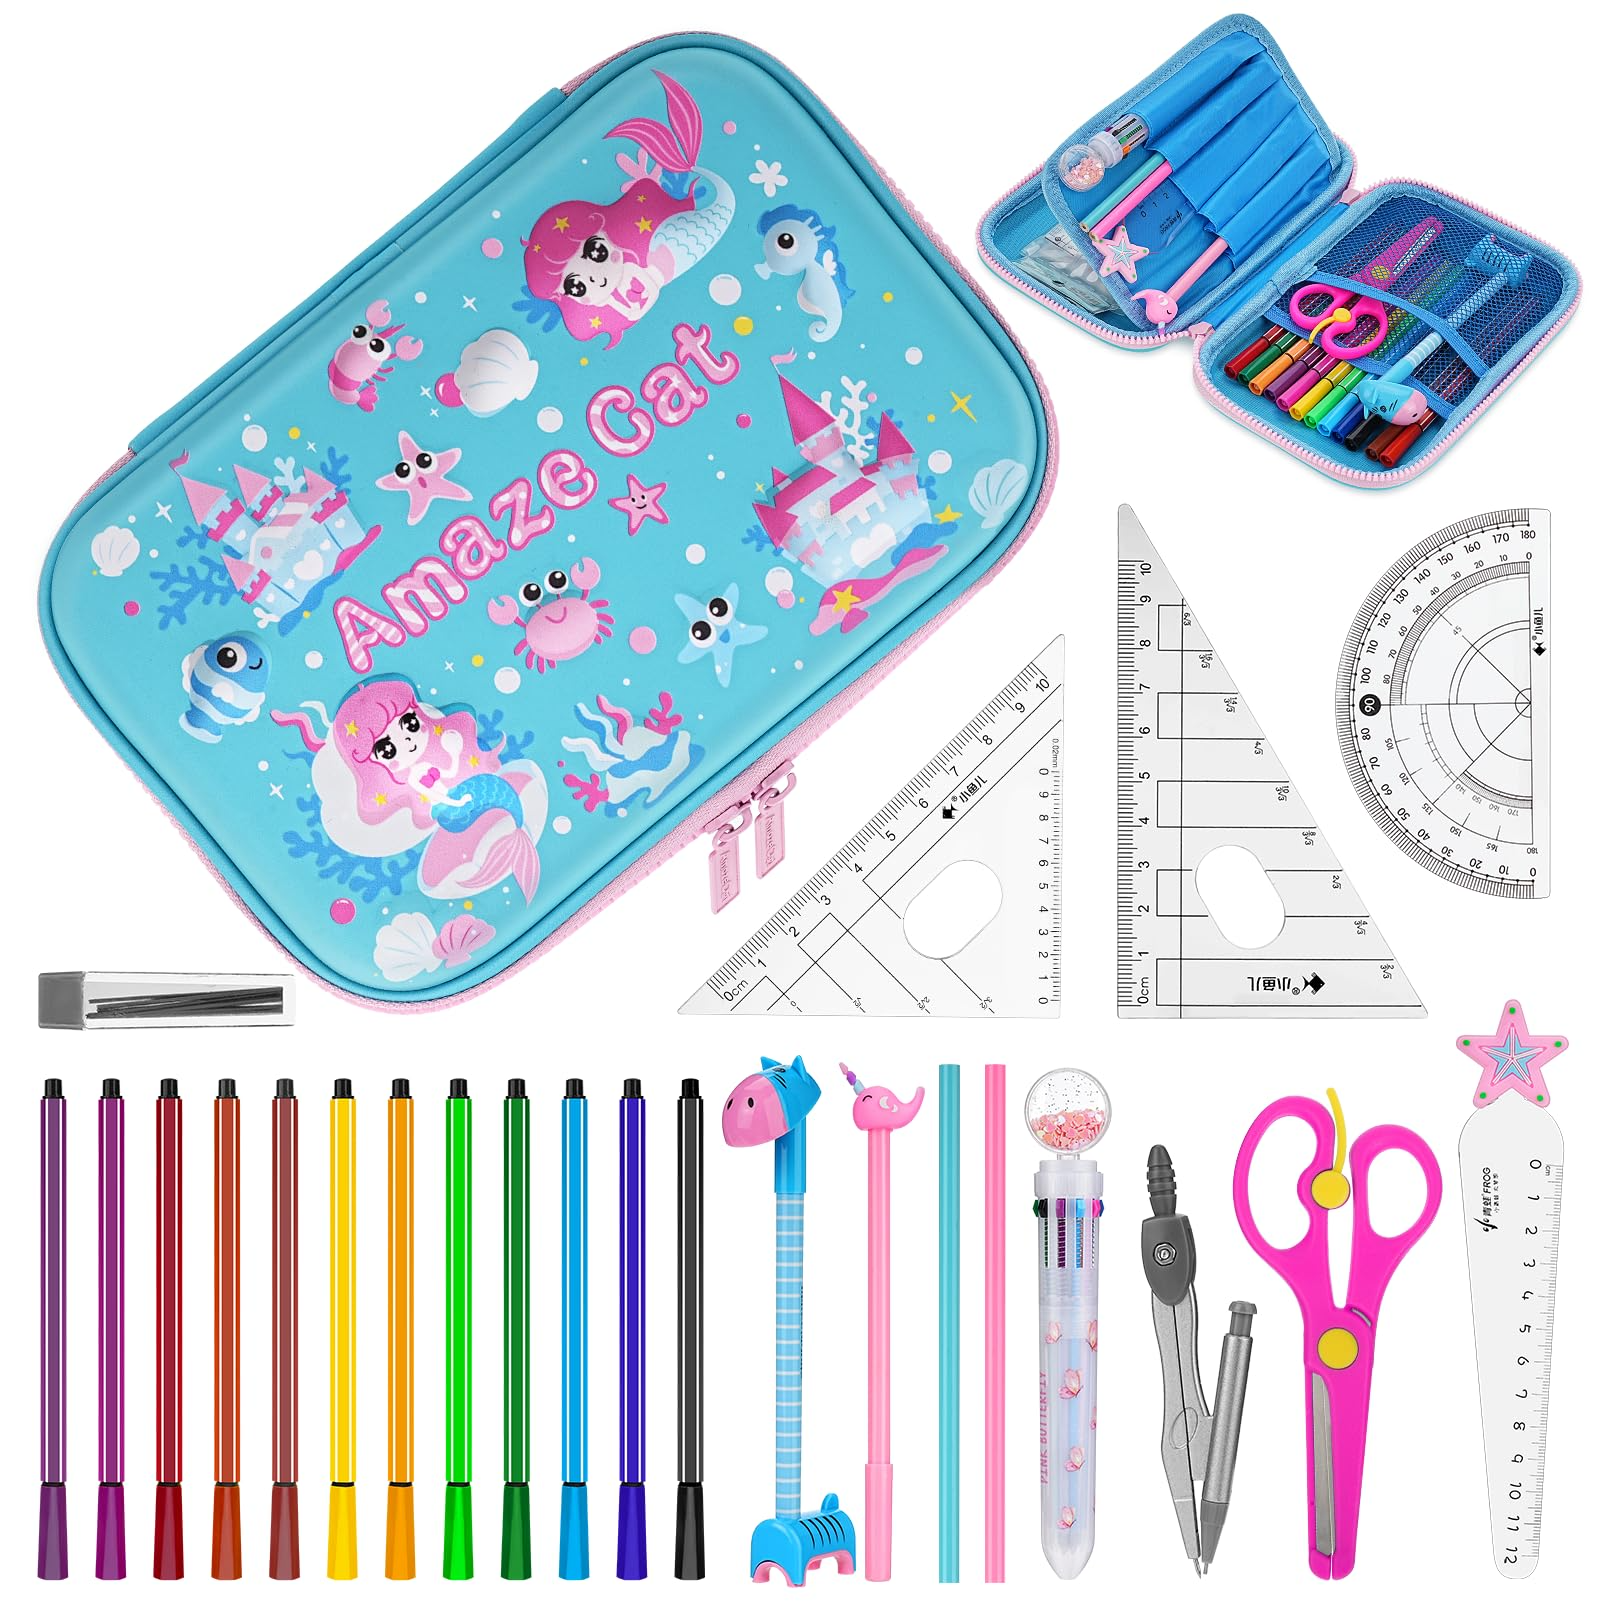 PRINxy Pencil Case for Kids, Pencil Case Aesthe-tic Portable Large